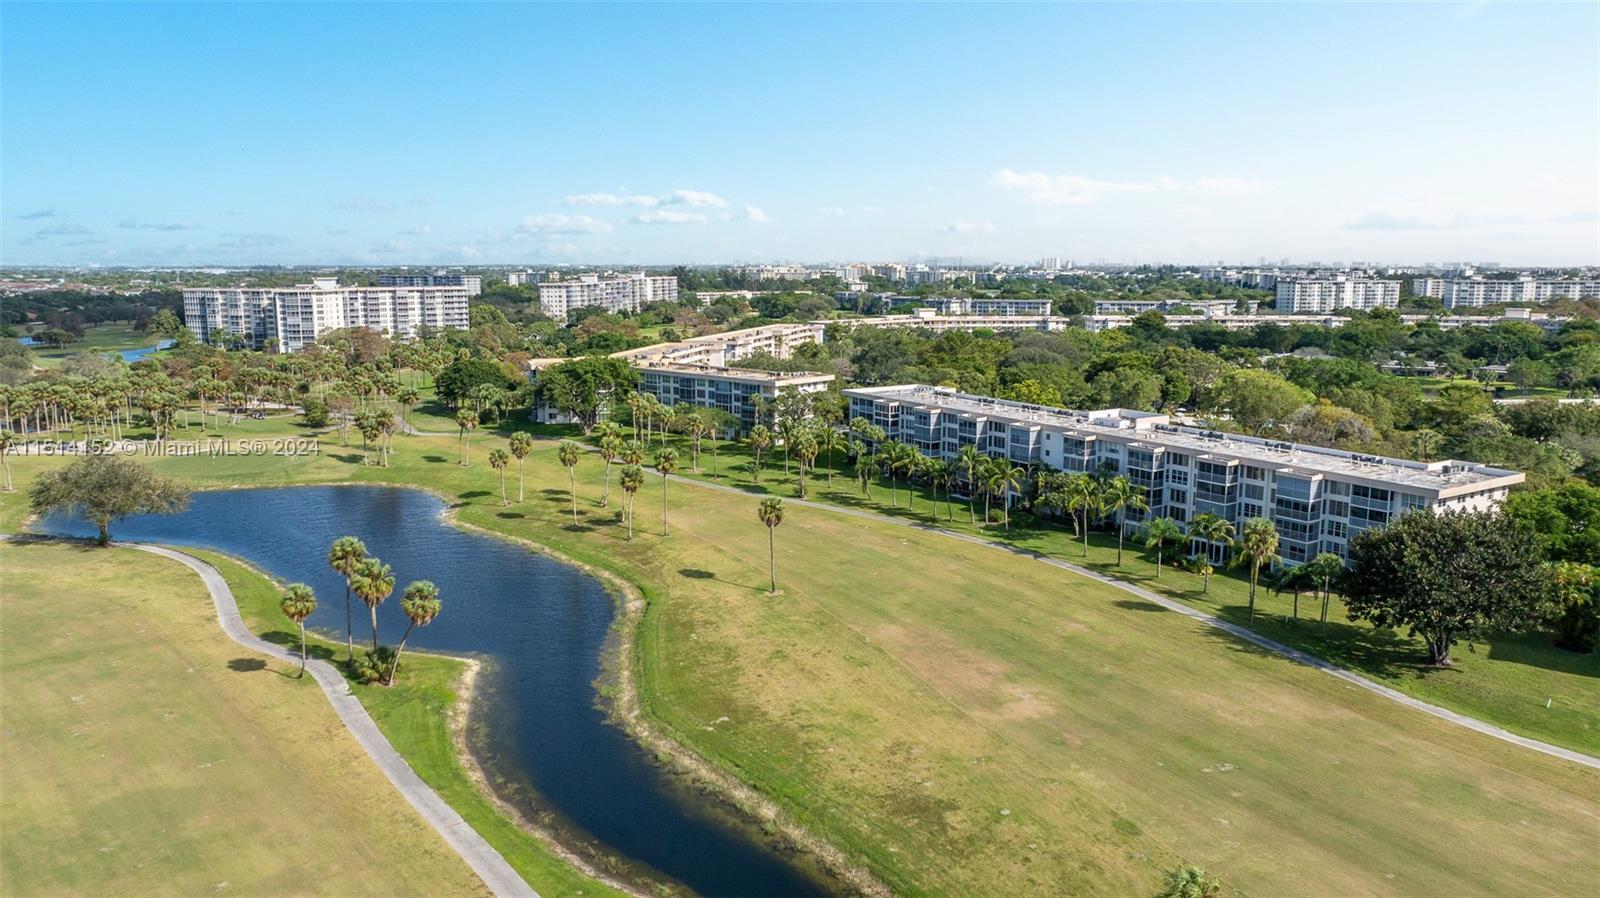 JUST REDUCED!! GORGEOUS FURNISHED CONDO located in a sought-after part of Palm-Aire. This is a 3 bed